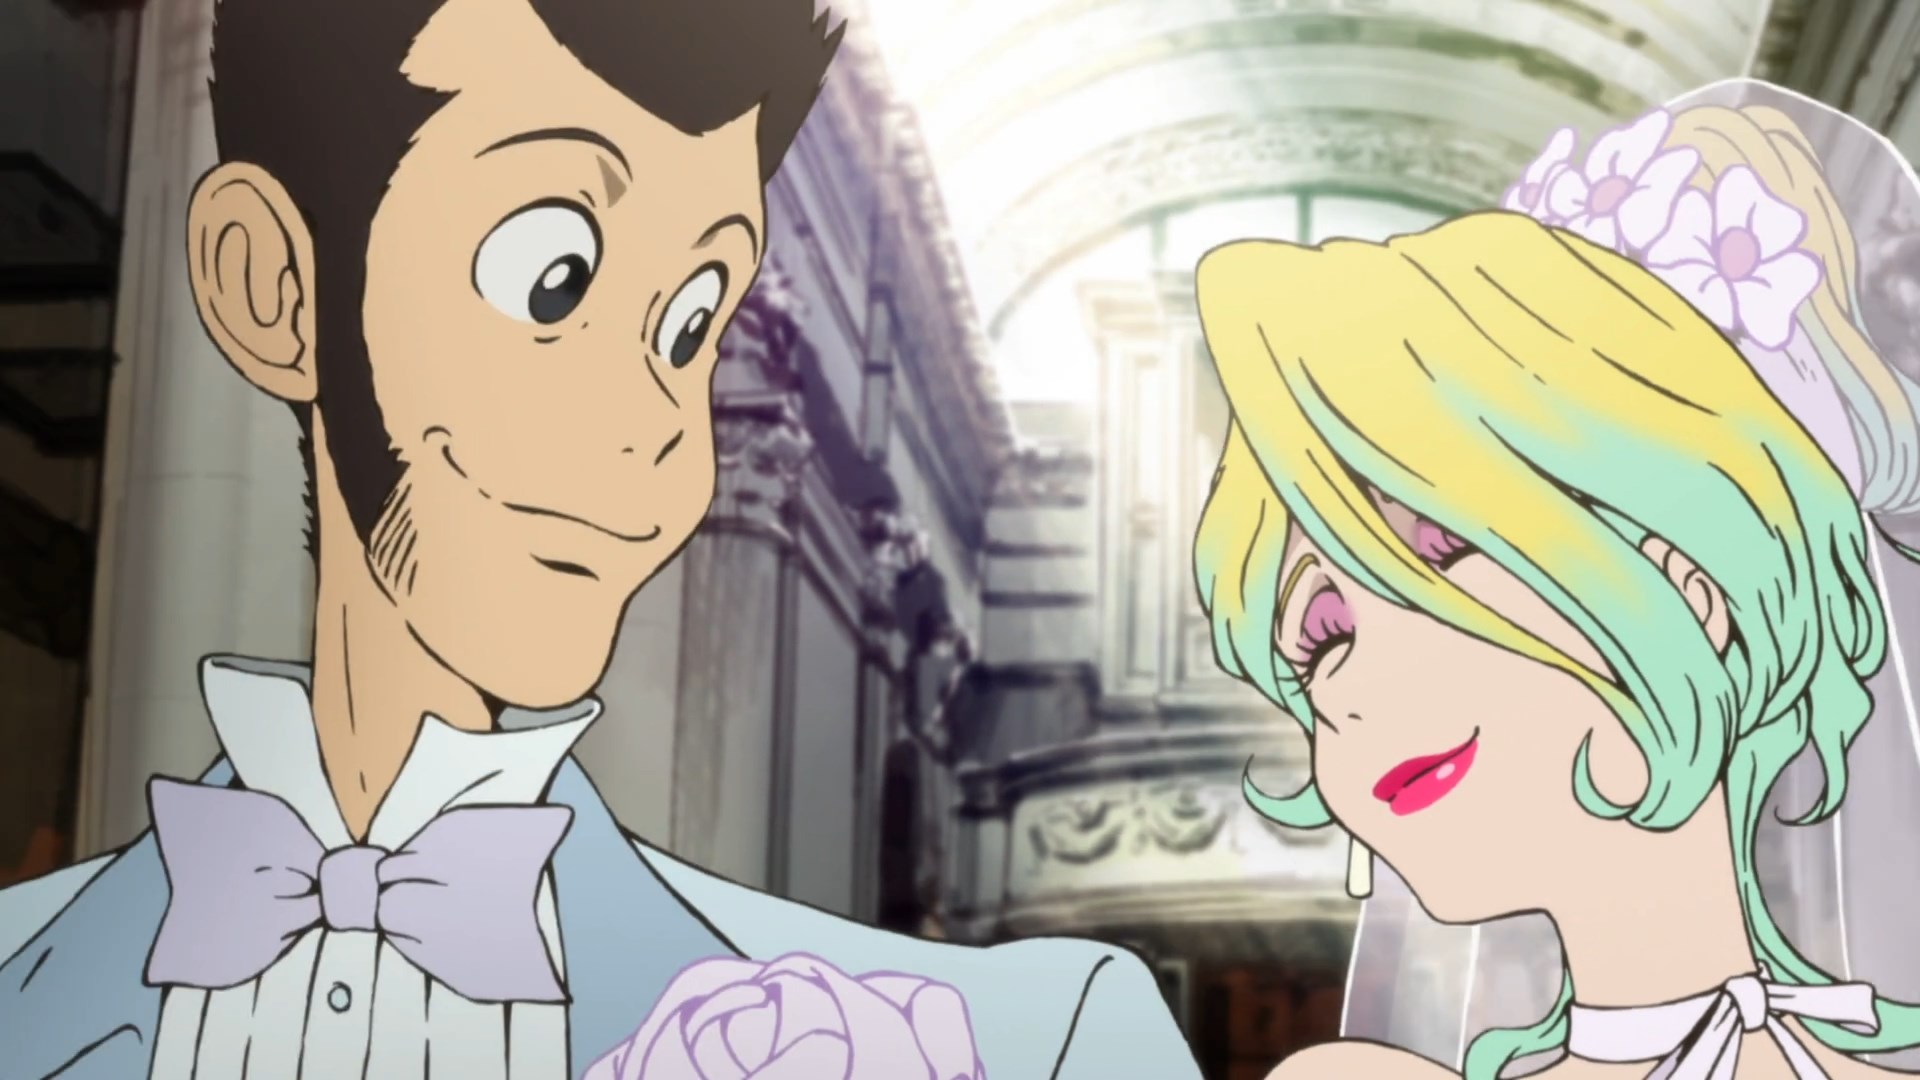 Lupin the Third PART4 01 Review (The thief gets a wife.) - AstroNerdBoy's  Anime & Manga Blog | AstroNerdBoy's Anime & Manga Blog